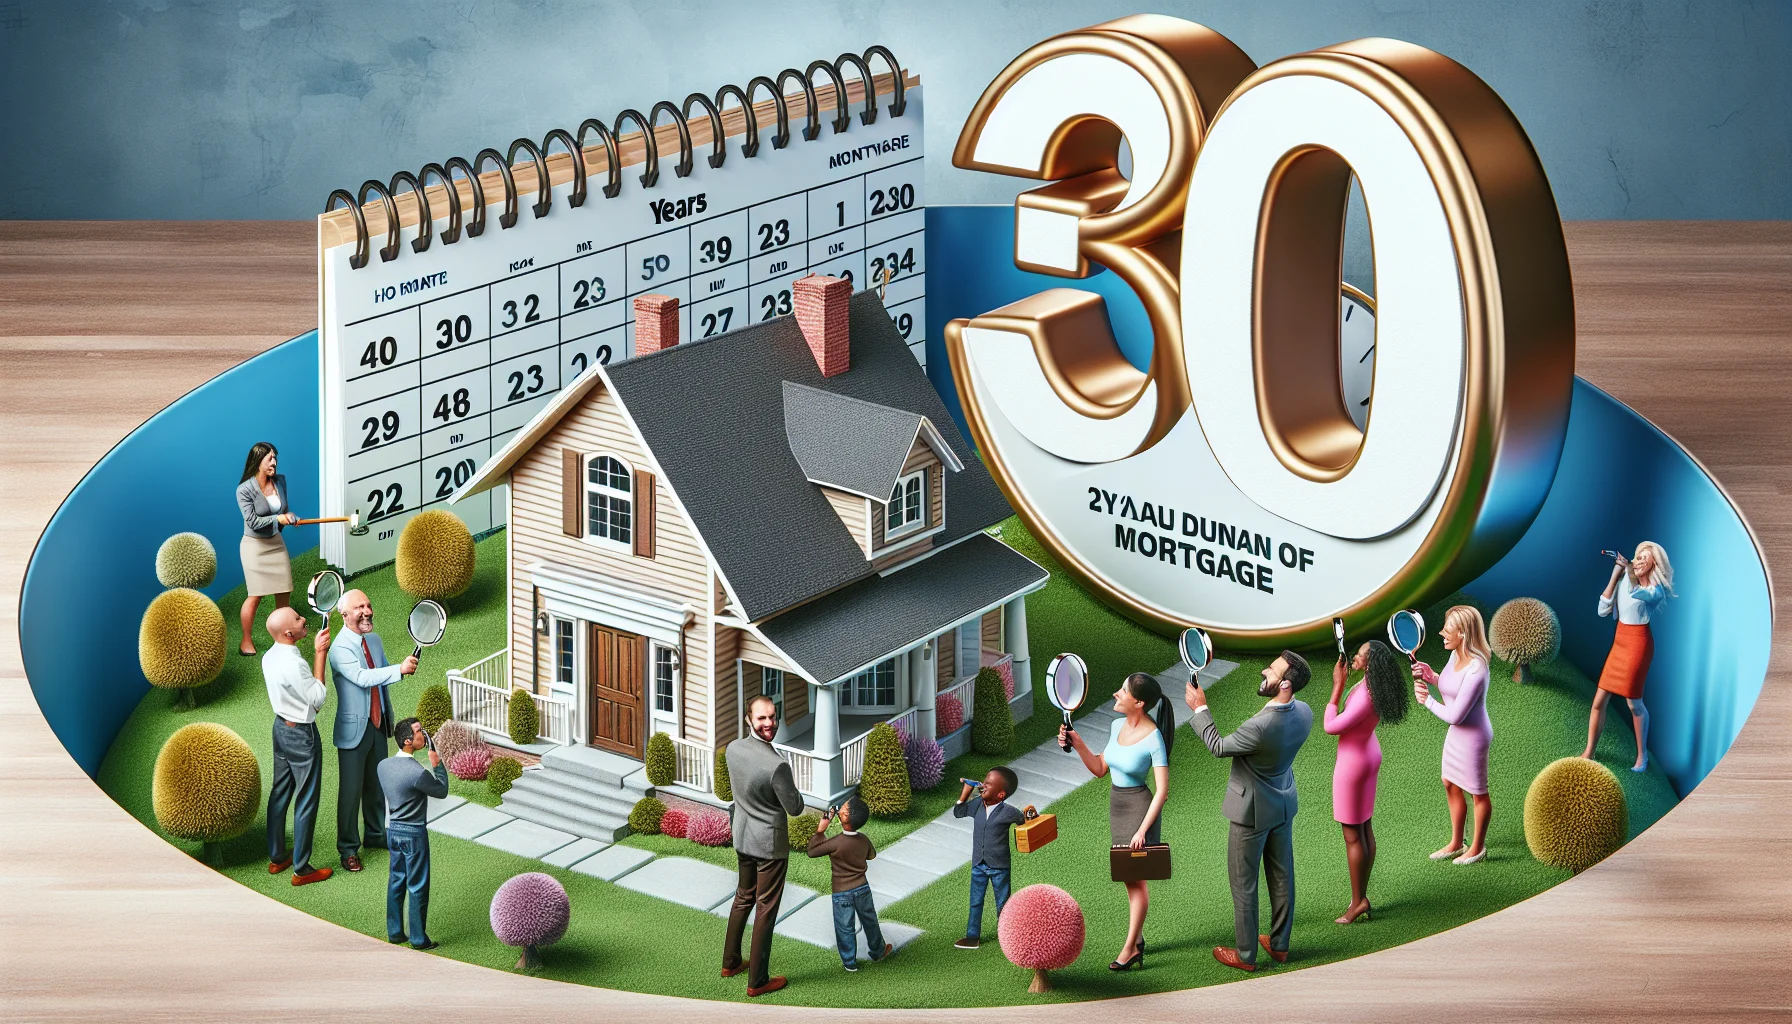 Create a humorous and realistic image displaying a typical duration of a home mortgage in an ideal real estate scenario. Picture a large, three-dimensional number '30' floating above a well-manicured suburban house, suggesting 30 years as the conventional mortgage plan. Also, include some happy people of diverse descents such as Caucasian, Black and Hispanic, each holding a magnifying glass examining a miniaturized house model which stands on a giant calendar depicting passing years, symbolizing the mortgage period. The entire scene should evoke a sense of humour and light-hearted education about home mortgages.